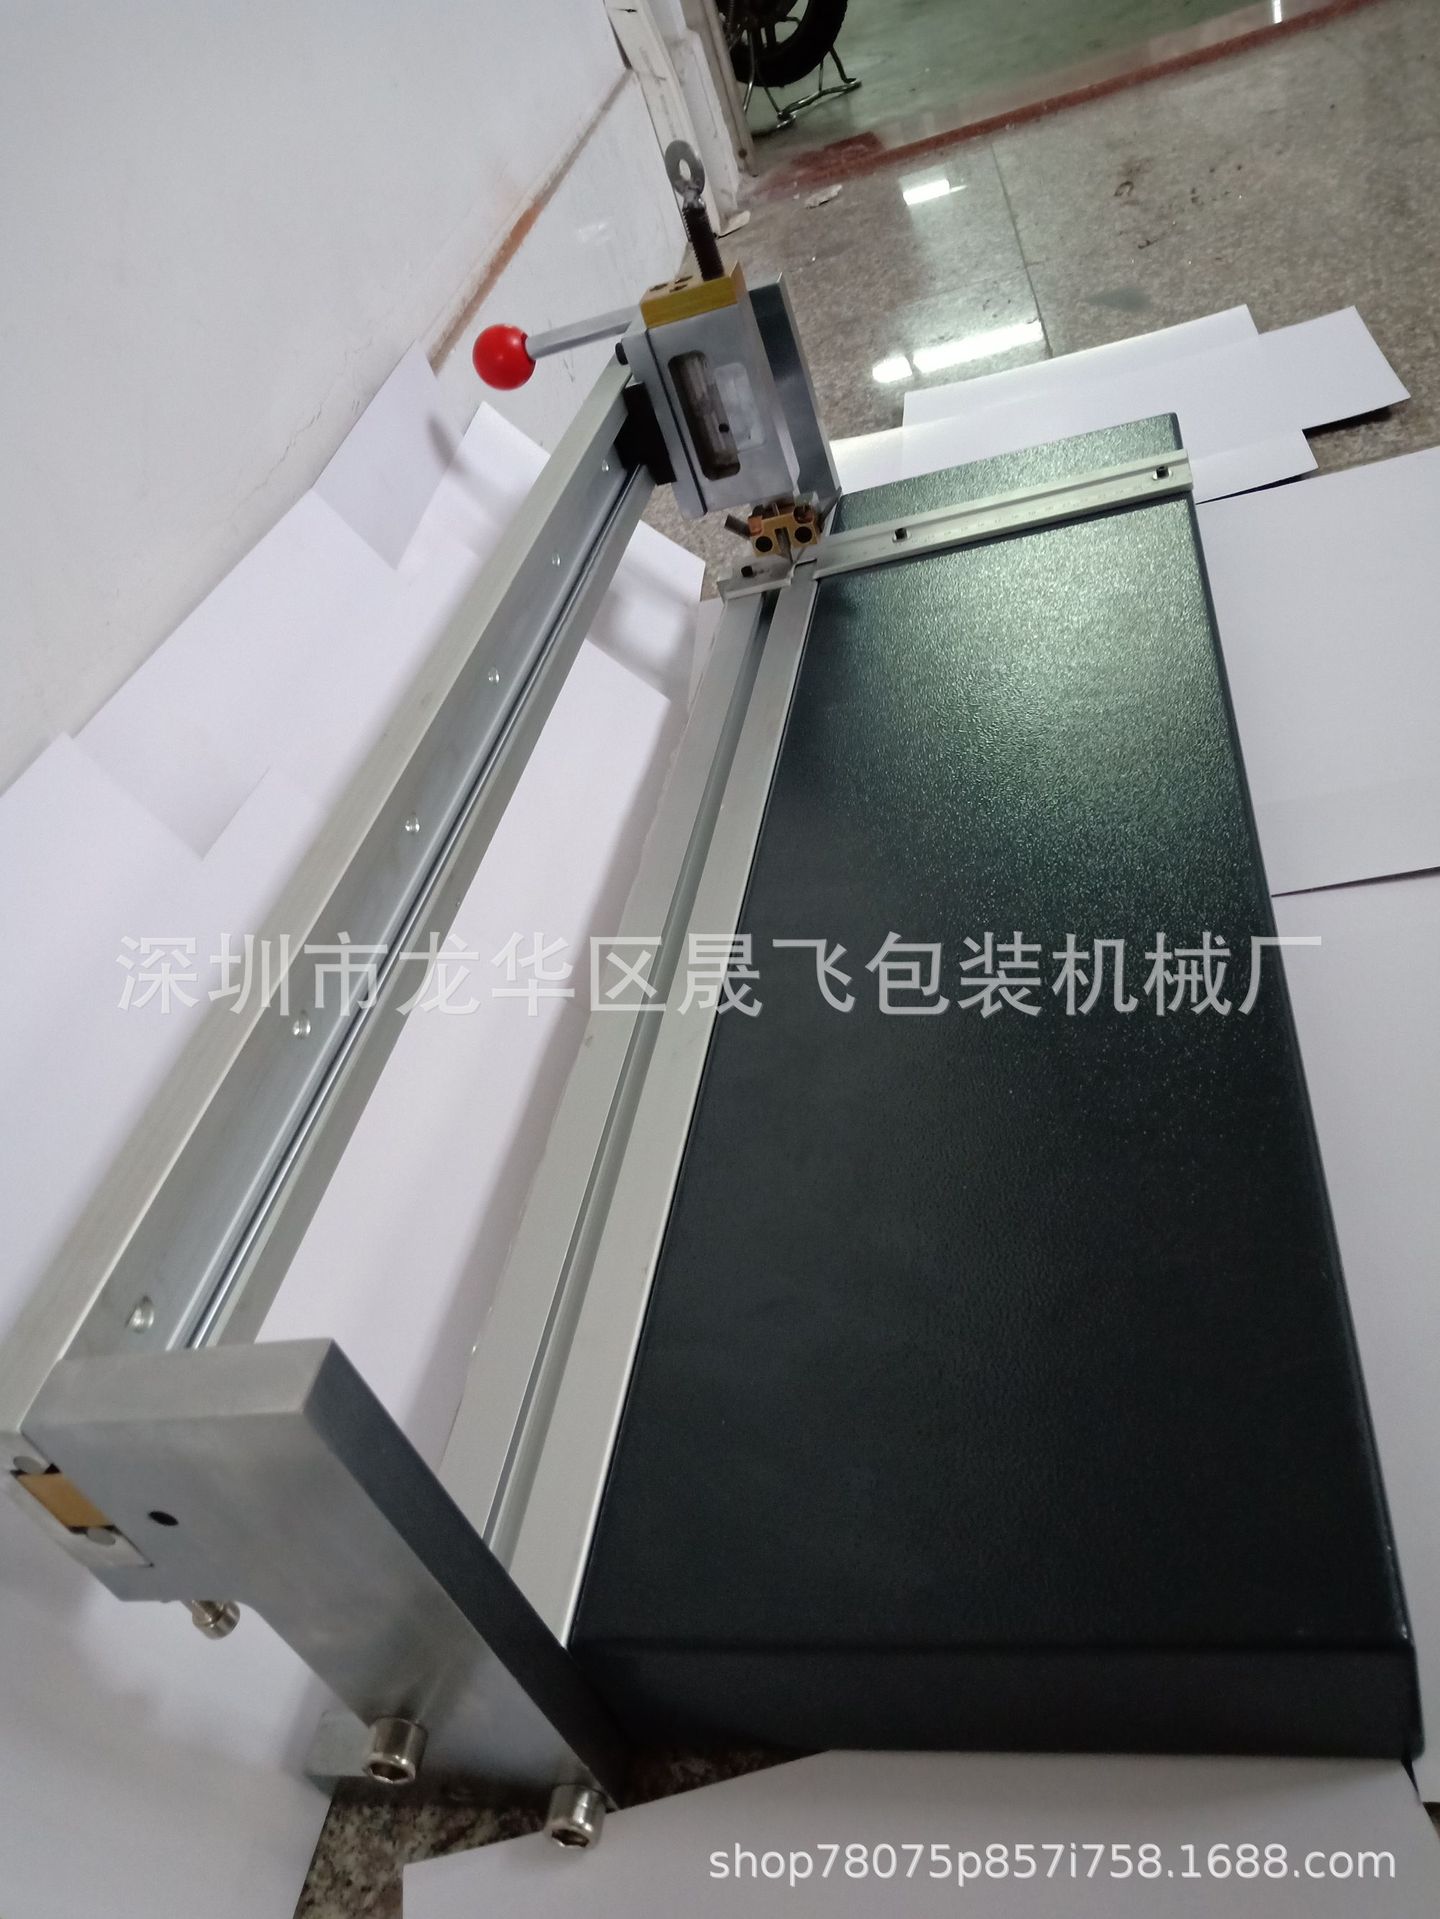 Offers Manual V-groove machine V-groove proofing machine Gift box slotter High precision Mechanization